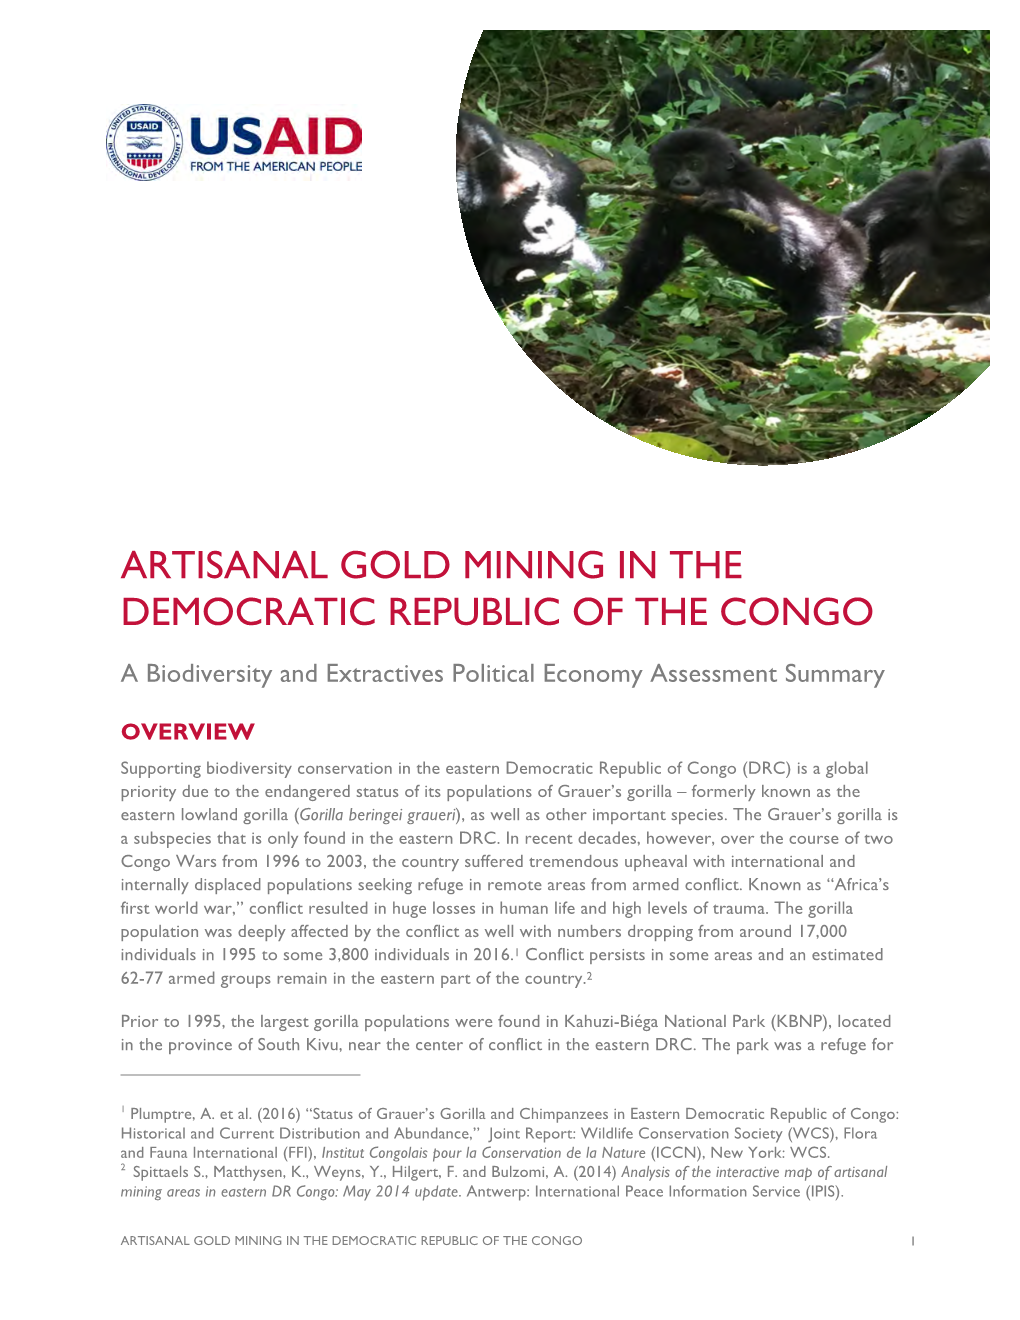 Artisanal Gold Mining in the Democratic Republic of the Congo